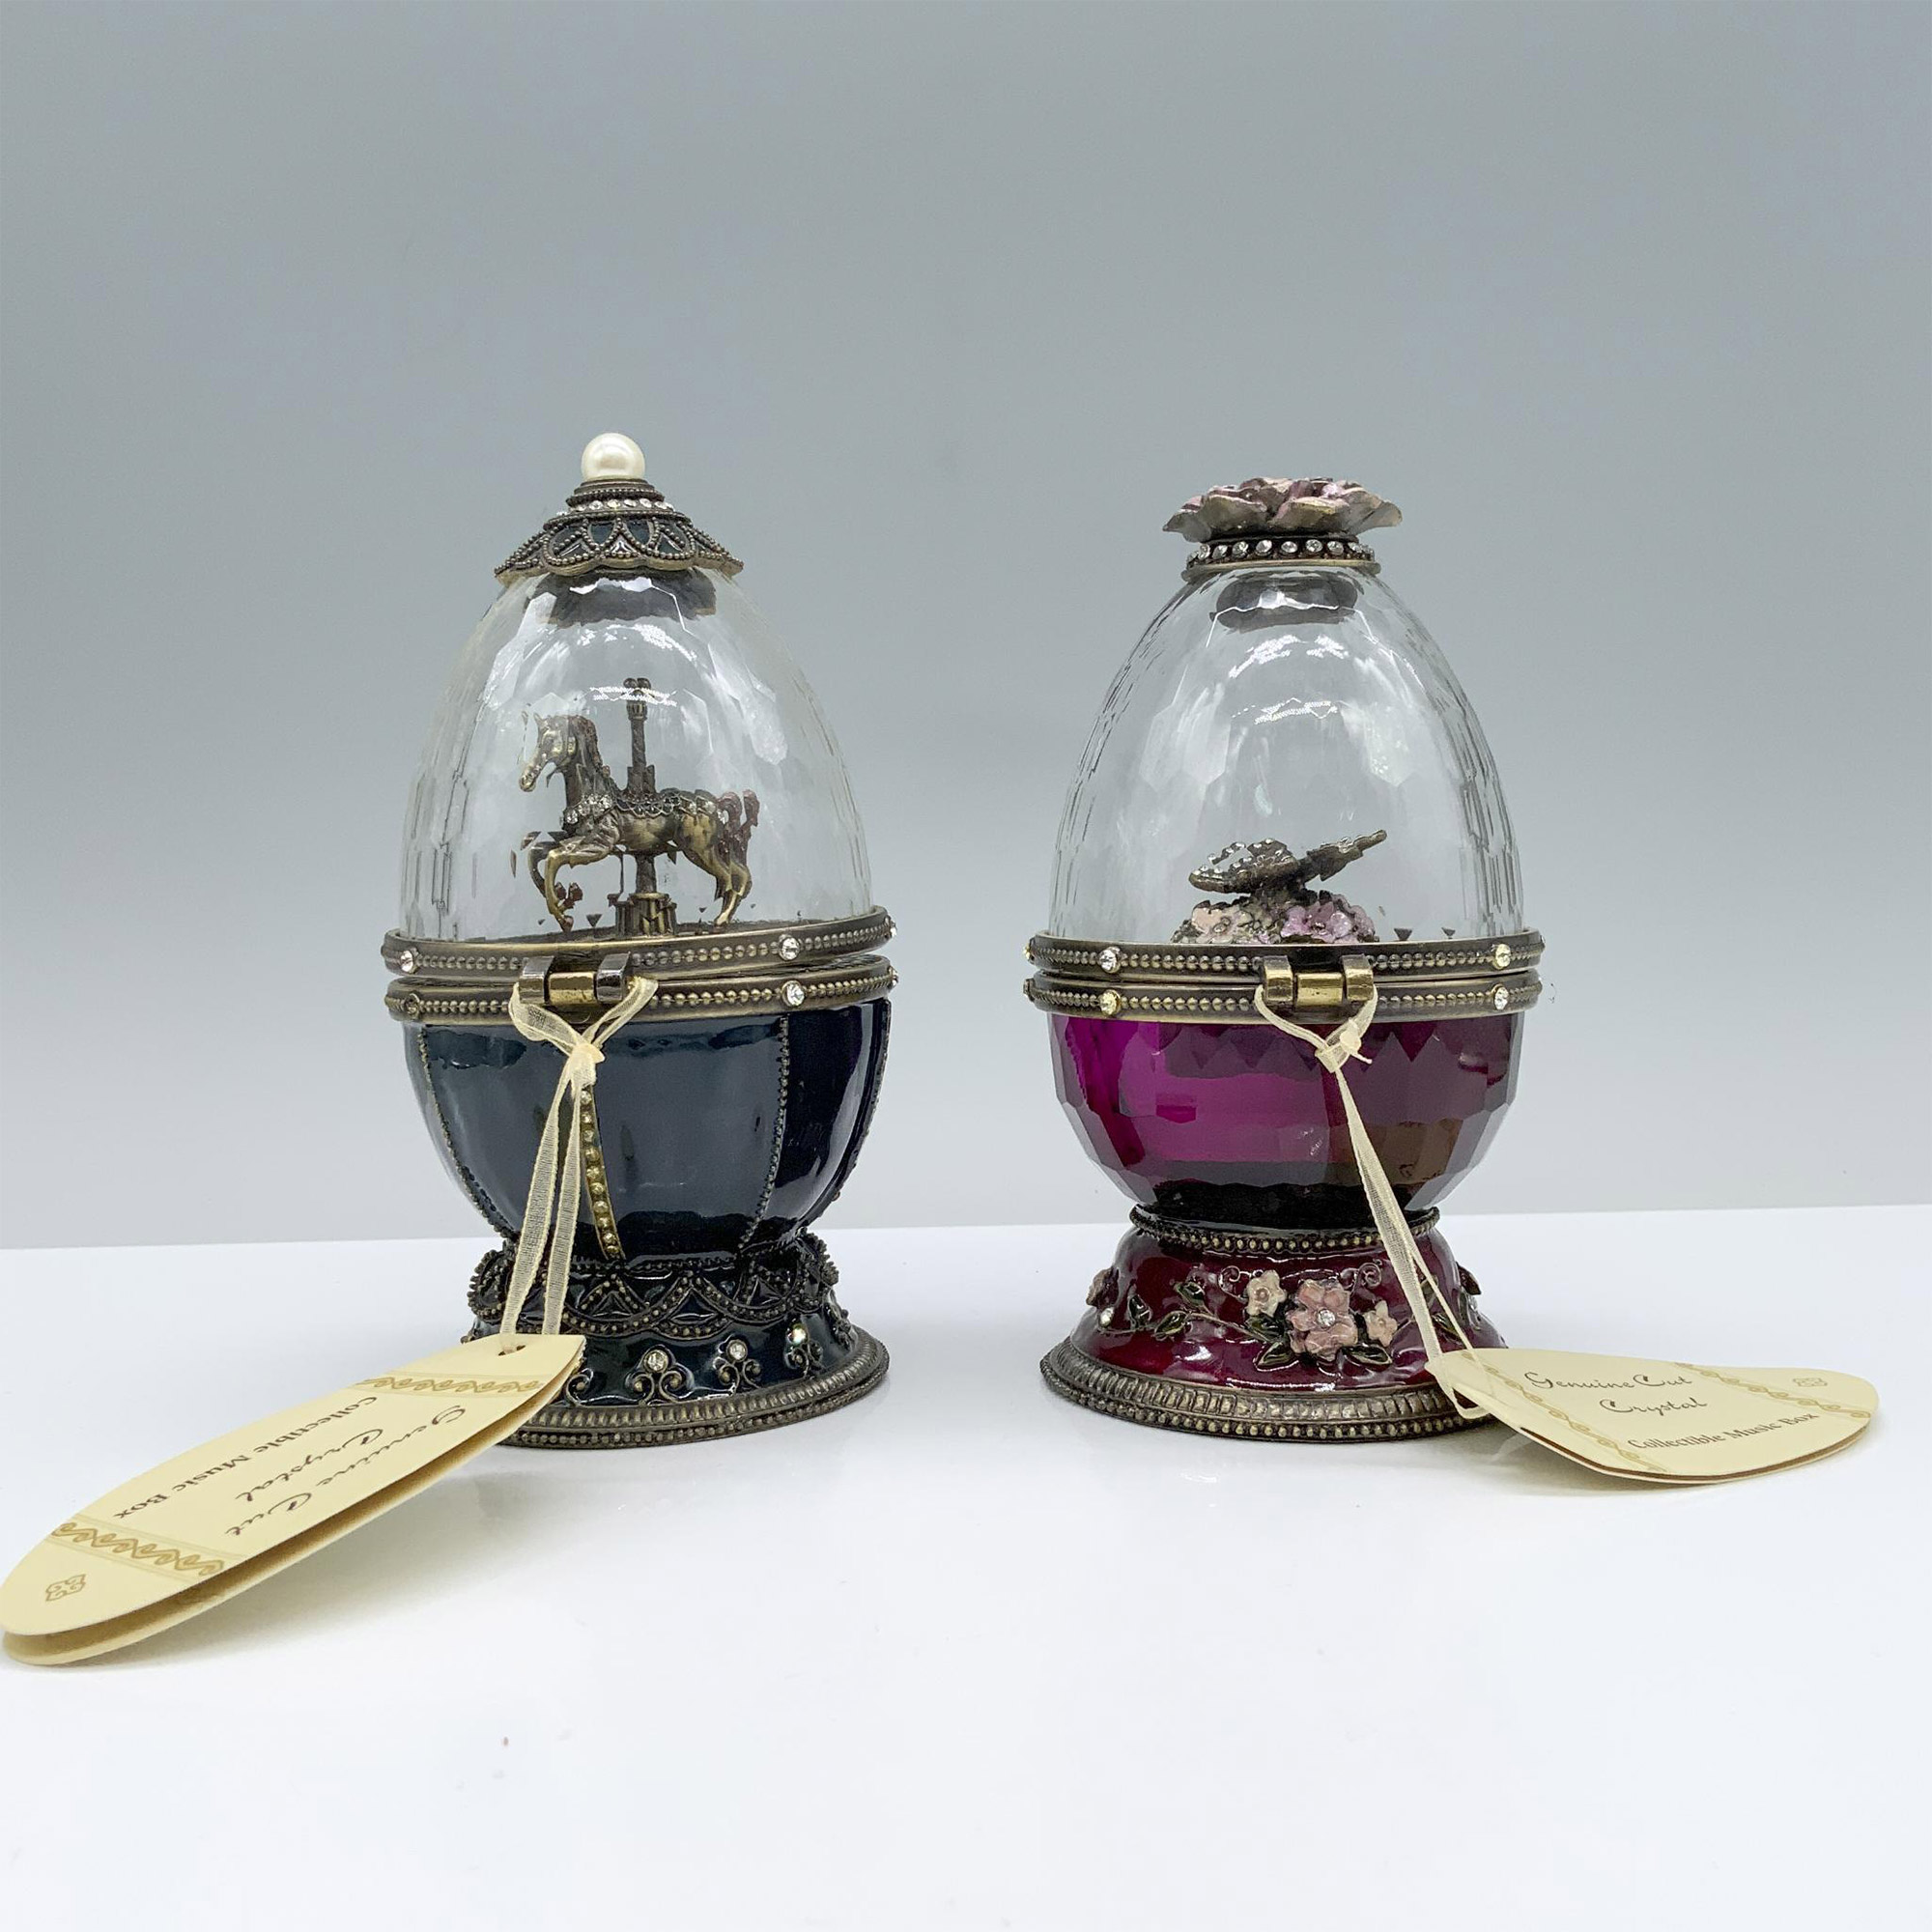 2pc Cut Crystal Music Boxes - Image 2 of 3